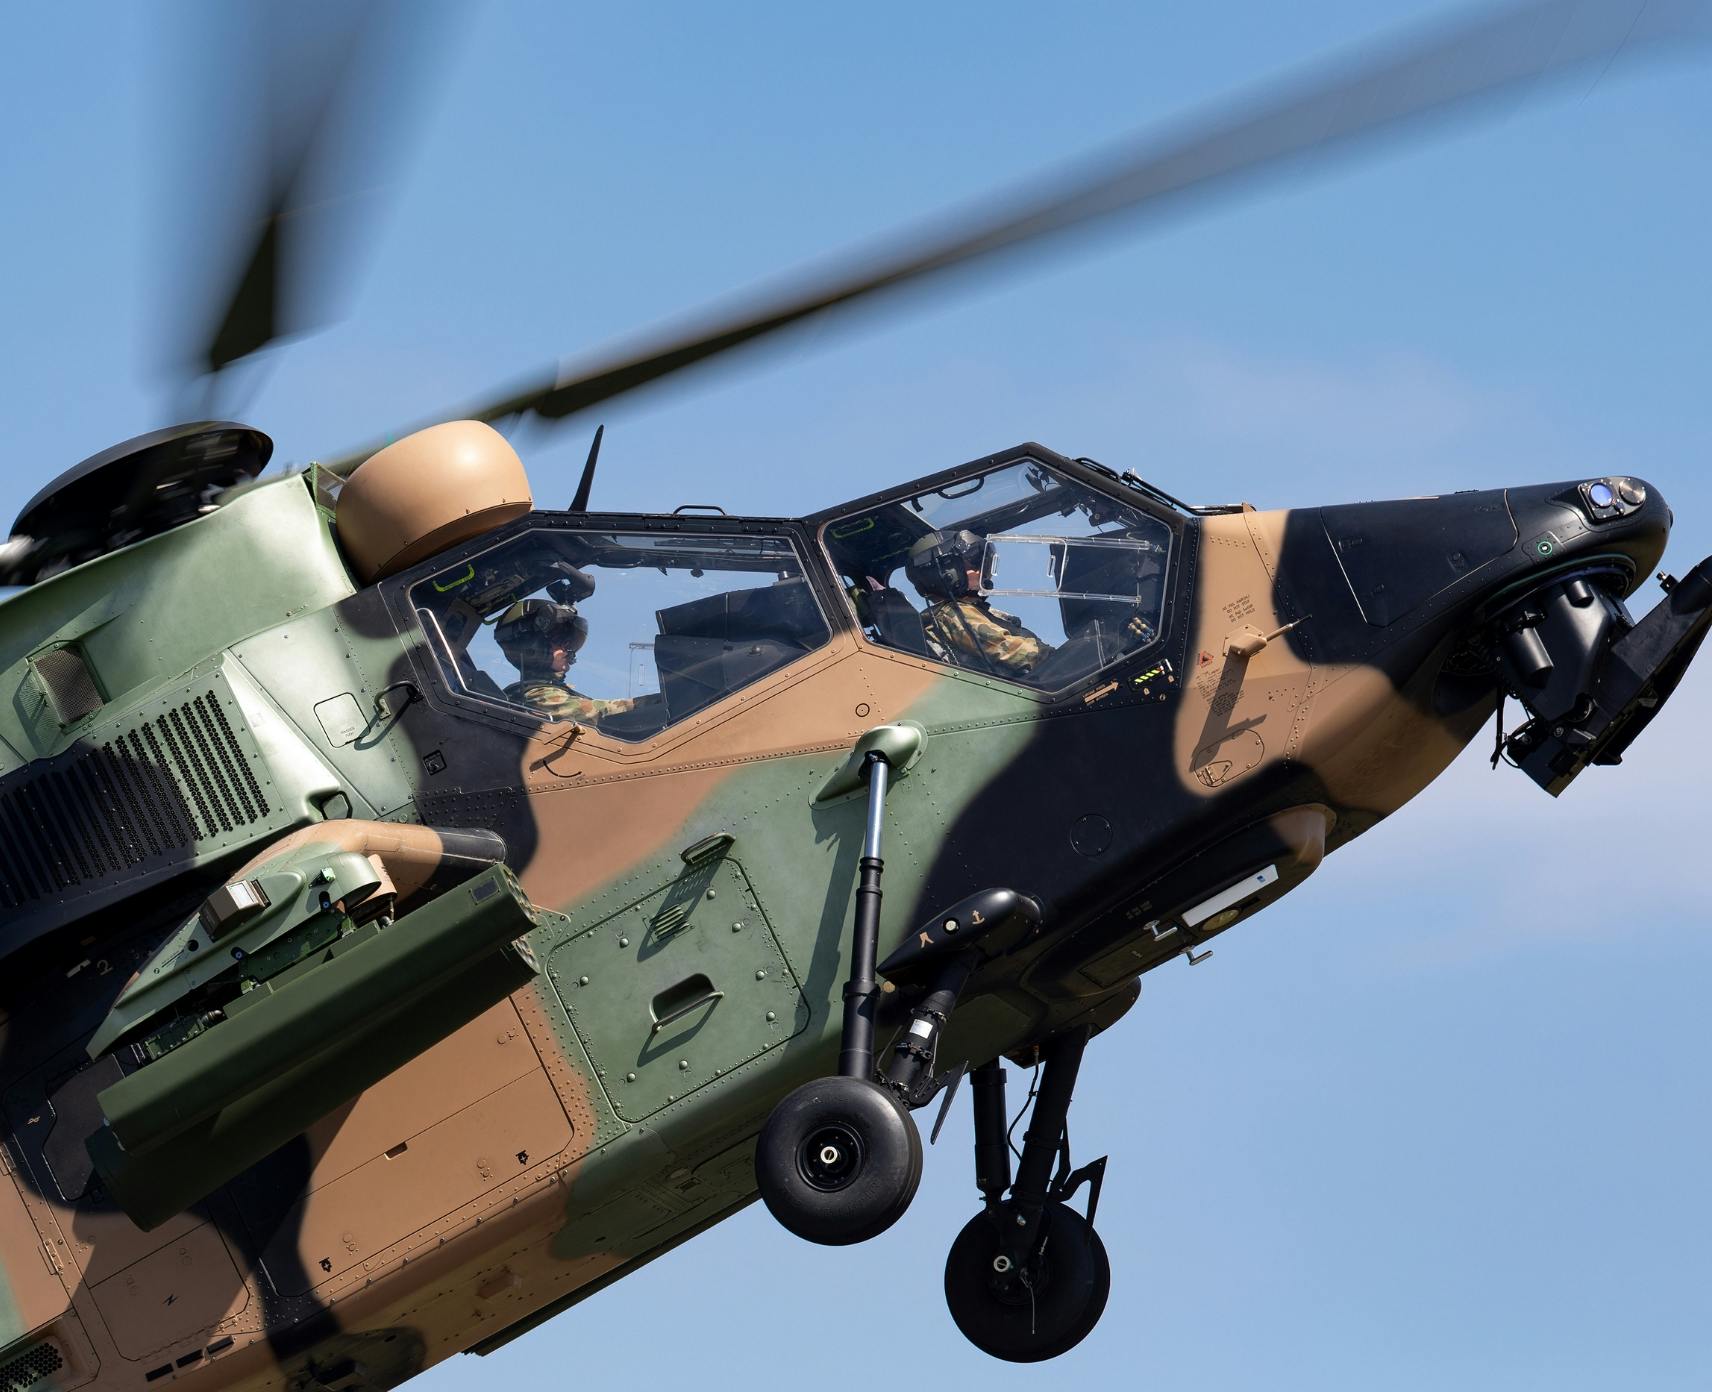 An Australian Army camouflaged helicopter flies upward against blue skies